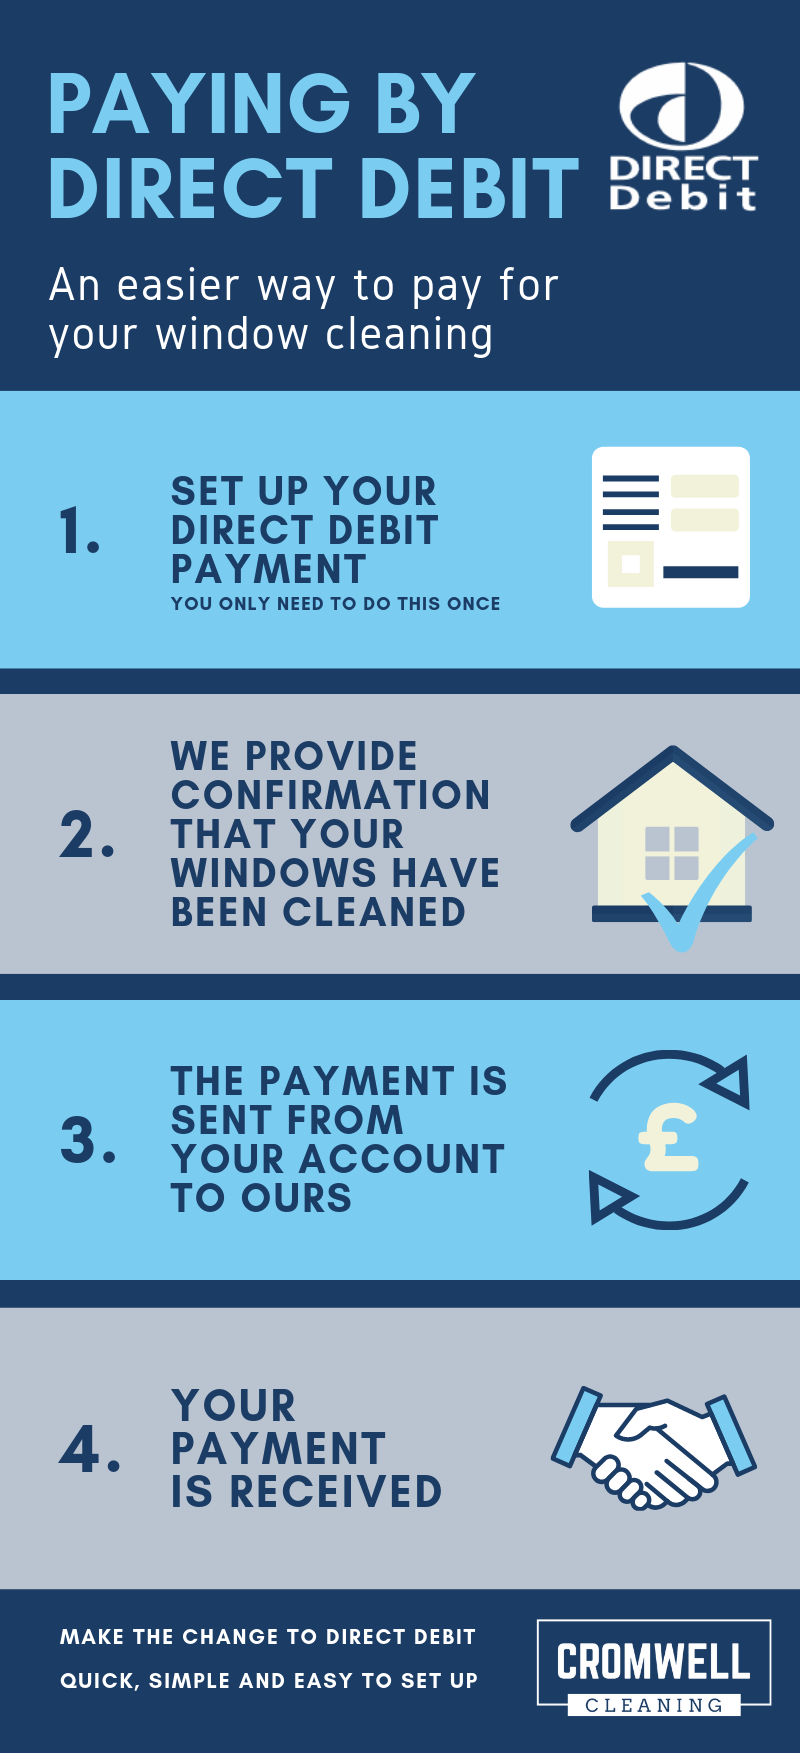 Cromwell Cleaning, paying by direct debit, how to pay, window cleaning, window cleaning warrington, warrington window cleaning, warrington window cleaner, window cleaner warrington, payment, payments